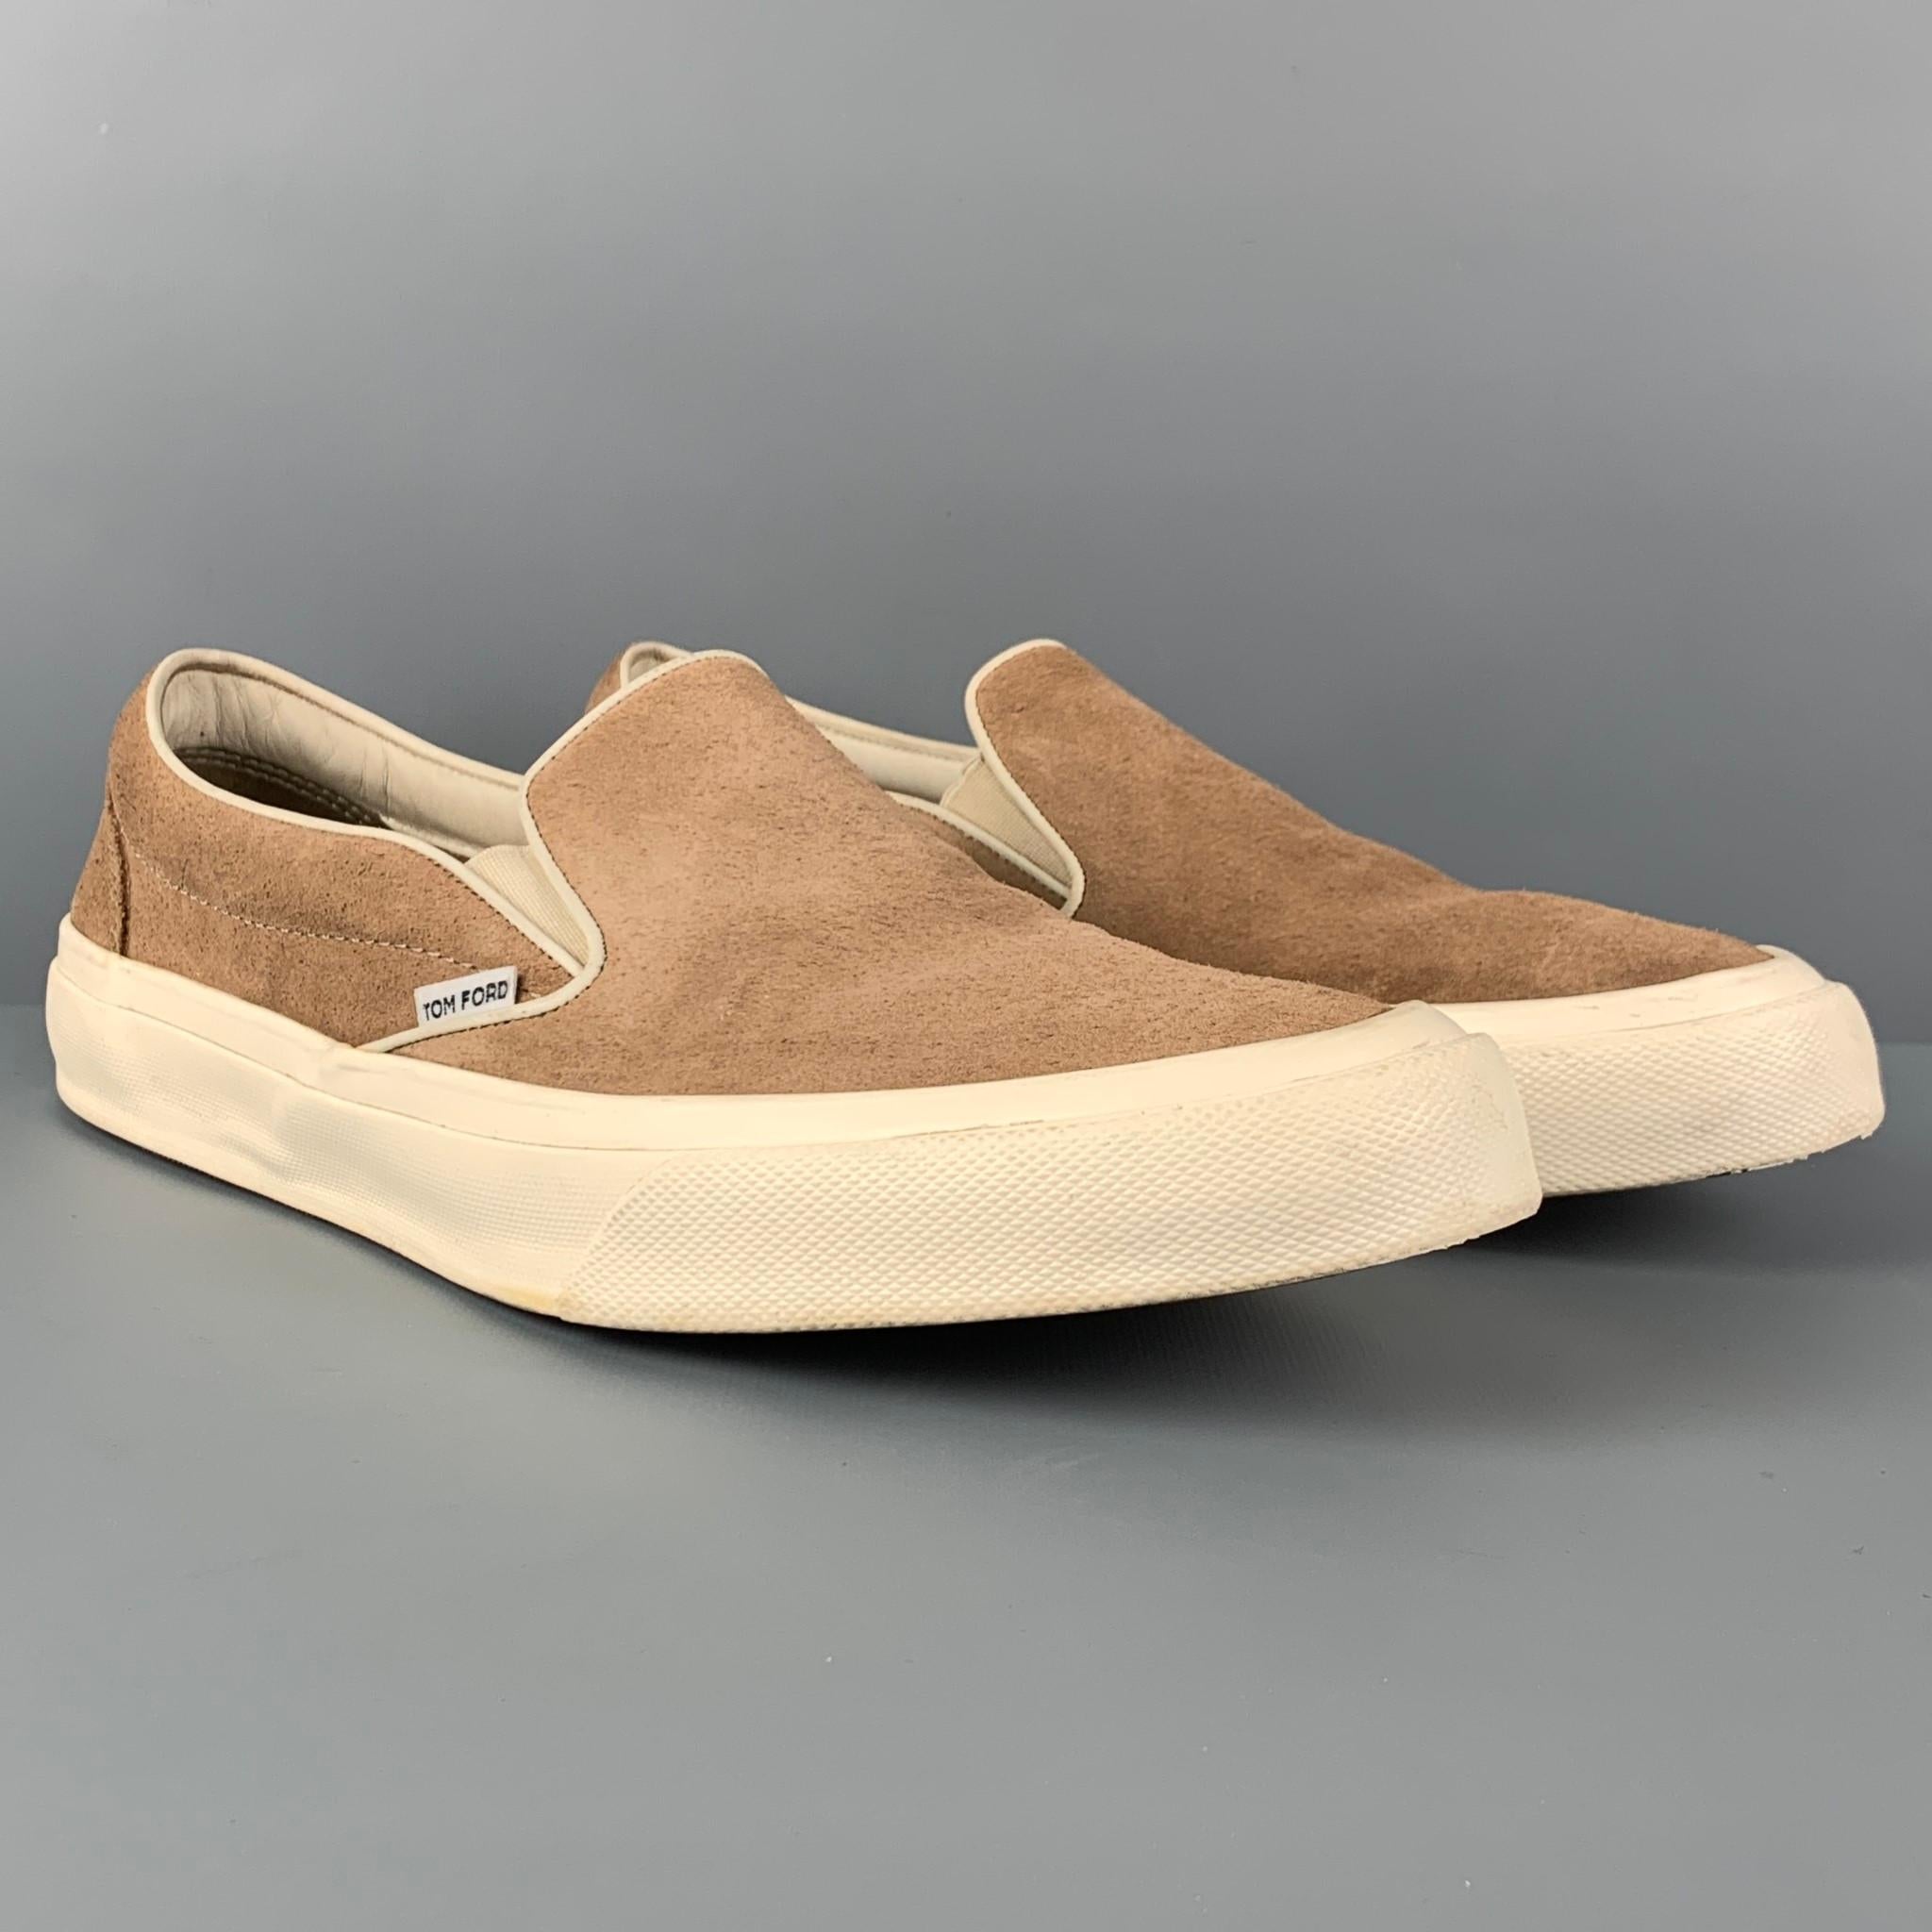 TOM FORD sneakers comes in a khaki suede featuring a slip on style and a rubber sole. Made in Italy. 

Very Good Pre-Owned Condition. Light wear.
Marked: 10

Outsole: 12 in. x 4 in. 